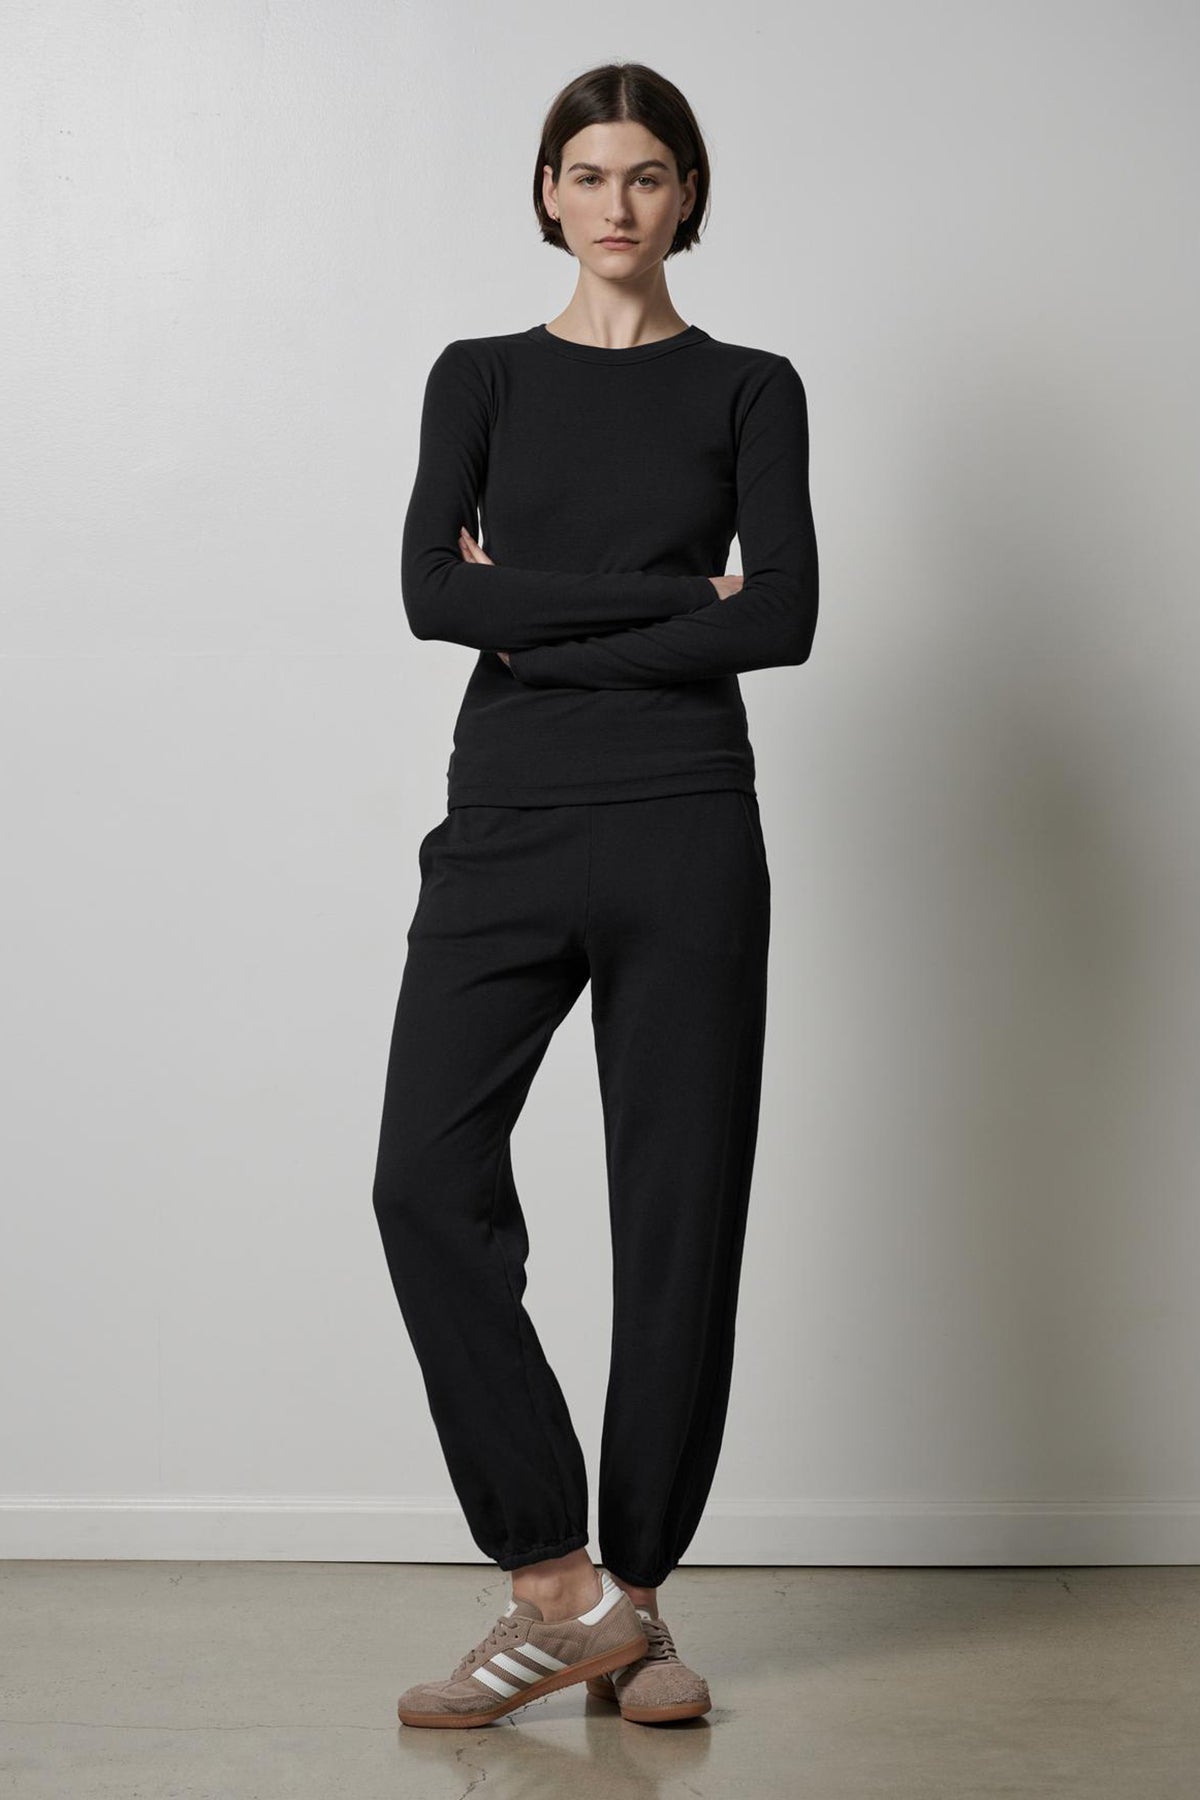   A woman wearing a black long-sleeved top and ZUMA SWEATPANT made from organic cotton. Brand Name: Velvet by Jenny Graham. 